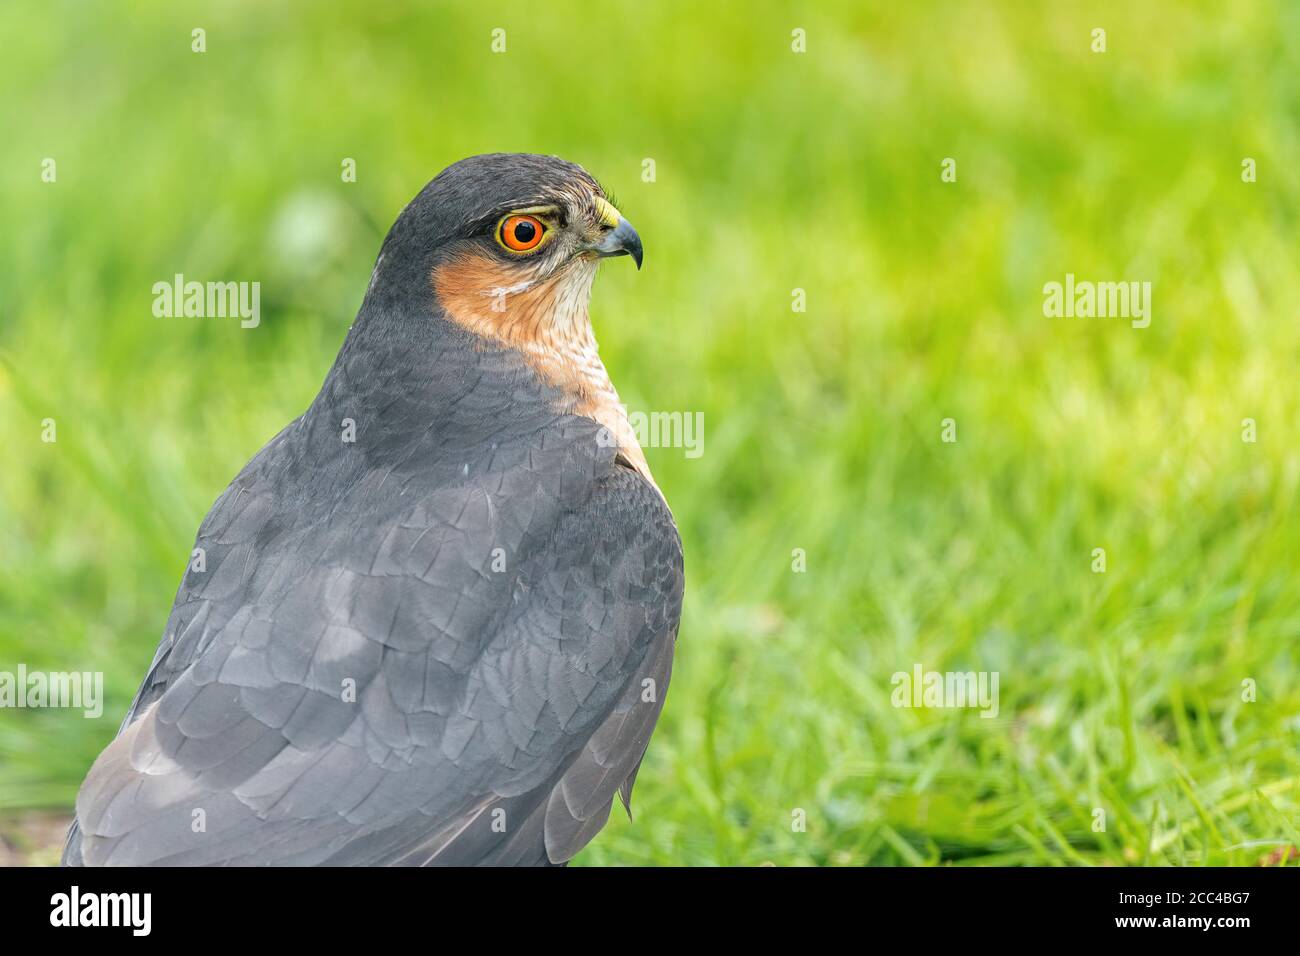 Close-up of mature male sparrowhawk (Accipiter nisus) sitting on lawn Stock Photo